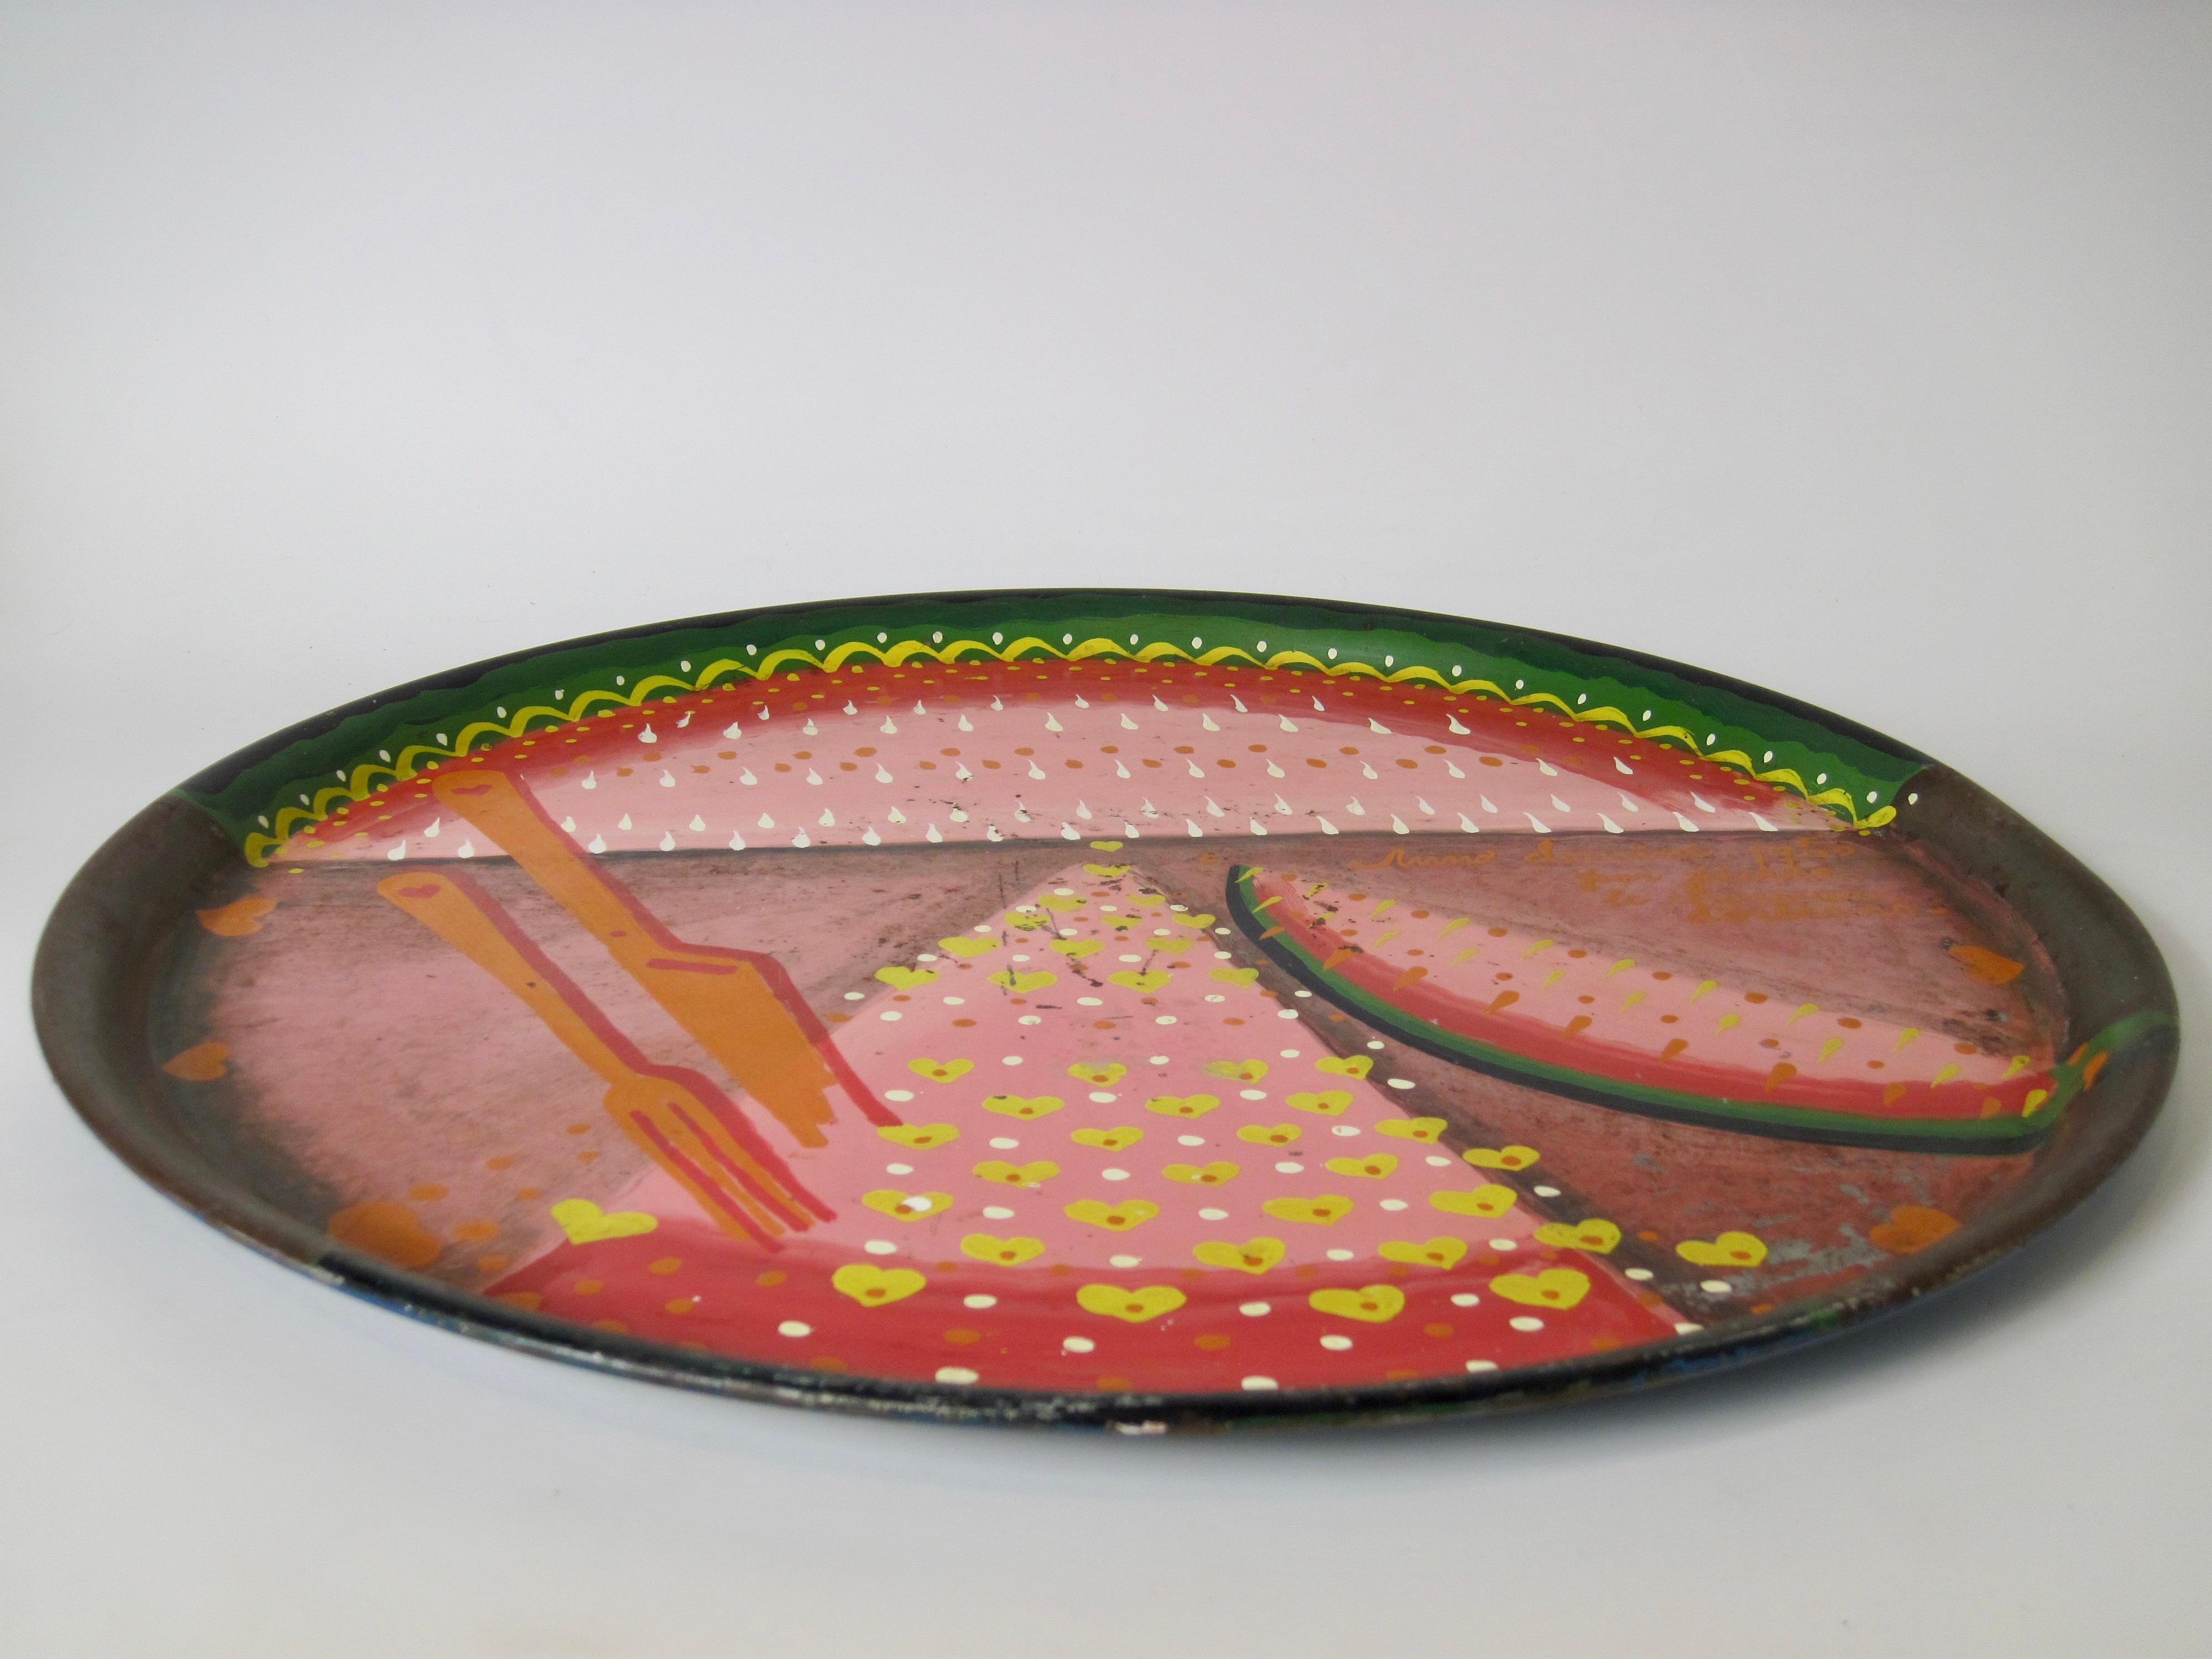 Large hand-painted watermelon metal tray by Massachusetts folk artist, Peter Hunt. 
Hand-signed on front anno domini 1960 par pierre le chasseur d'orleans. 
Hand signed on verso Welcome to Villa Fortuna ♡ Peter To Alice & Bob(?) Michal

Obvious use